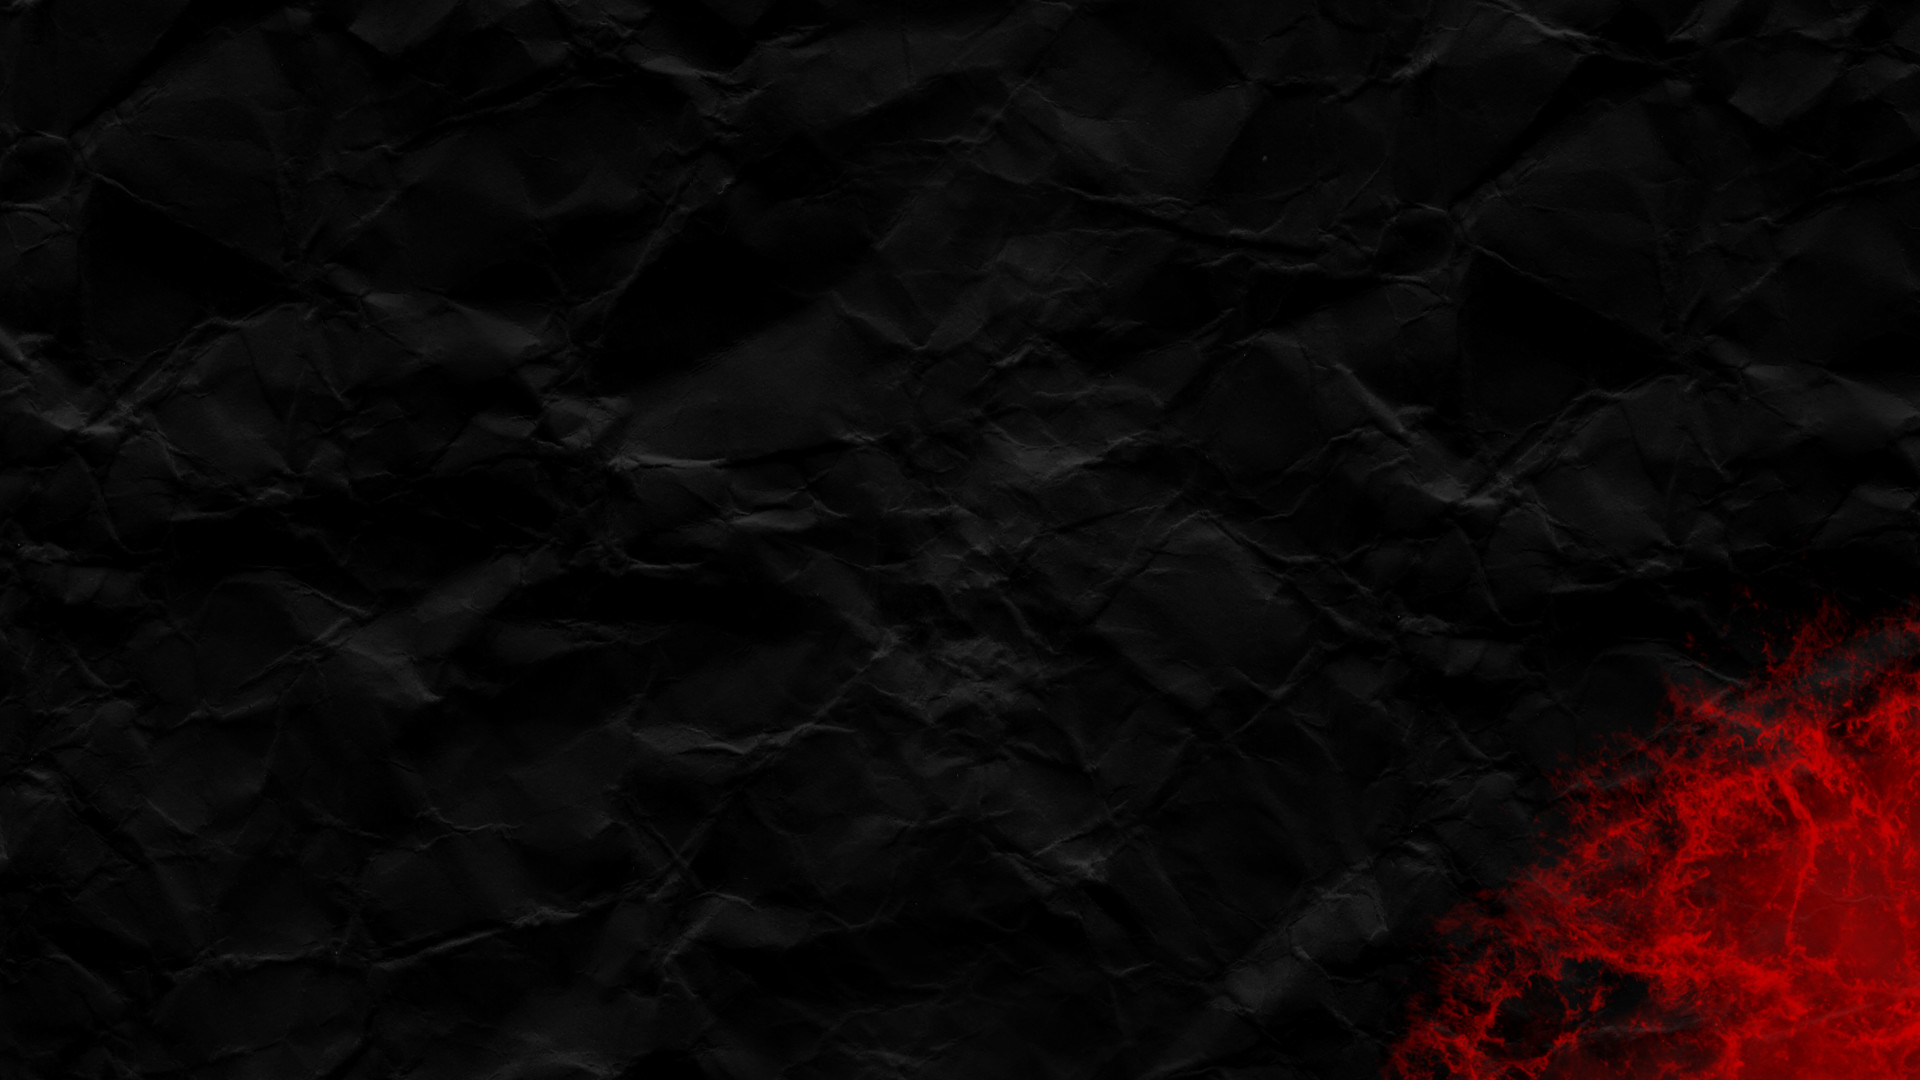 1920x1080 Black And Red Desktop Backgrounds